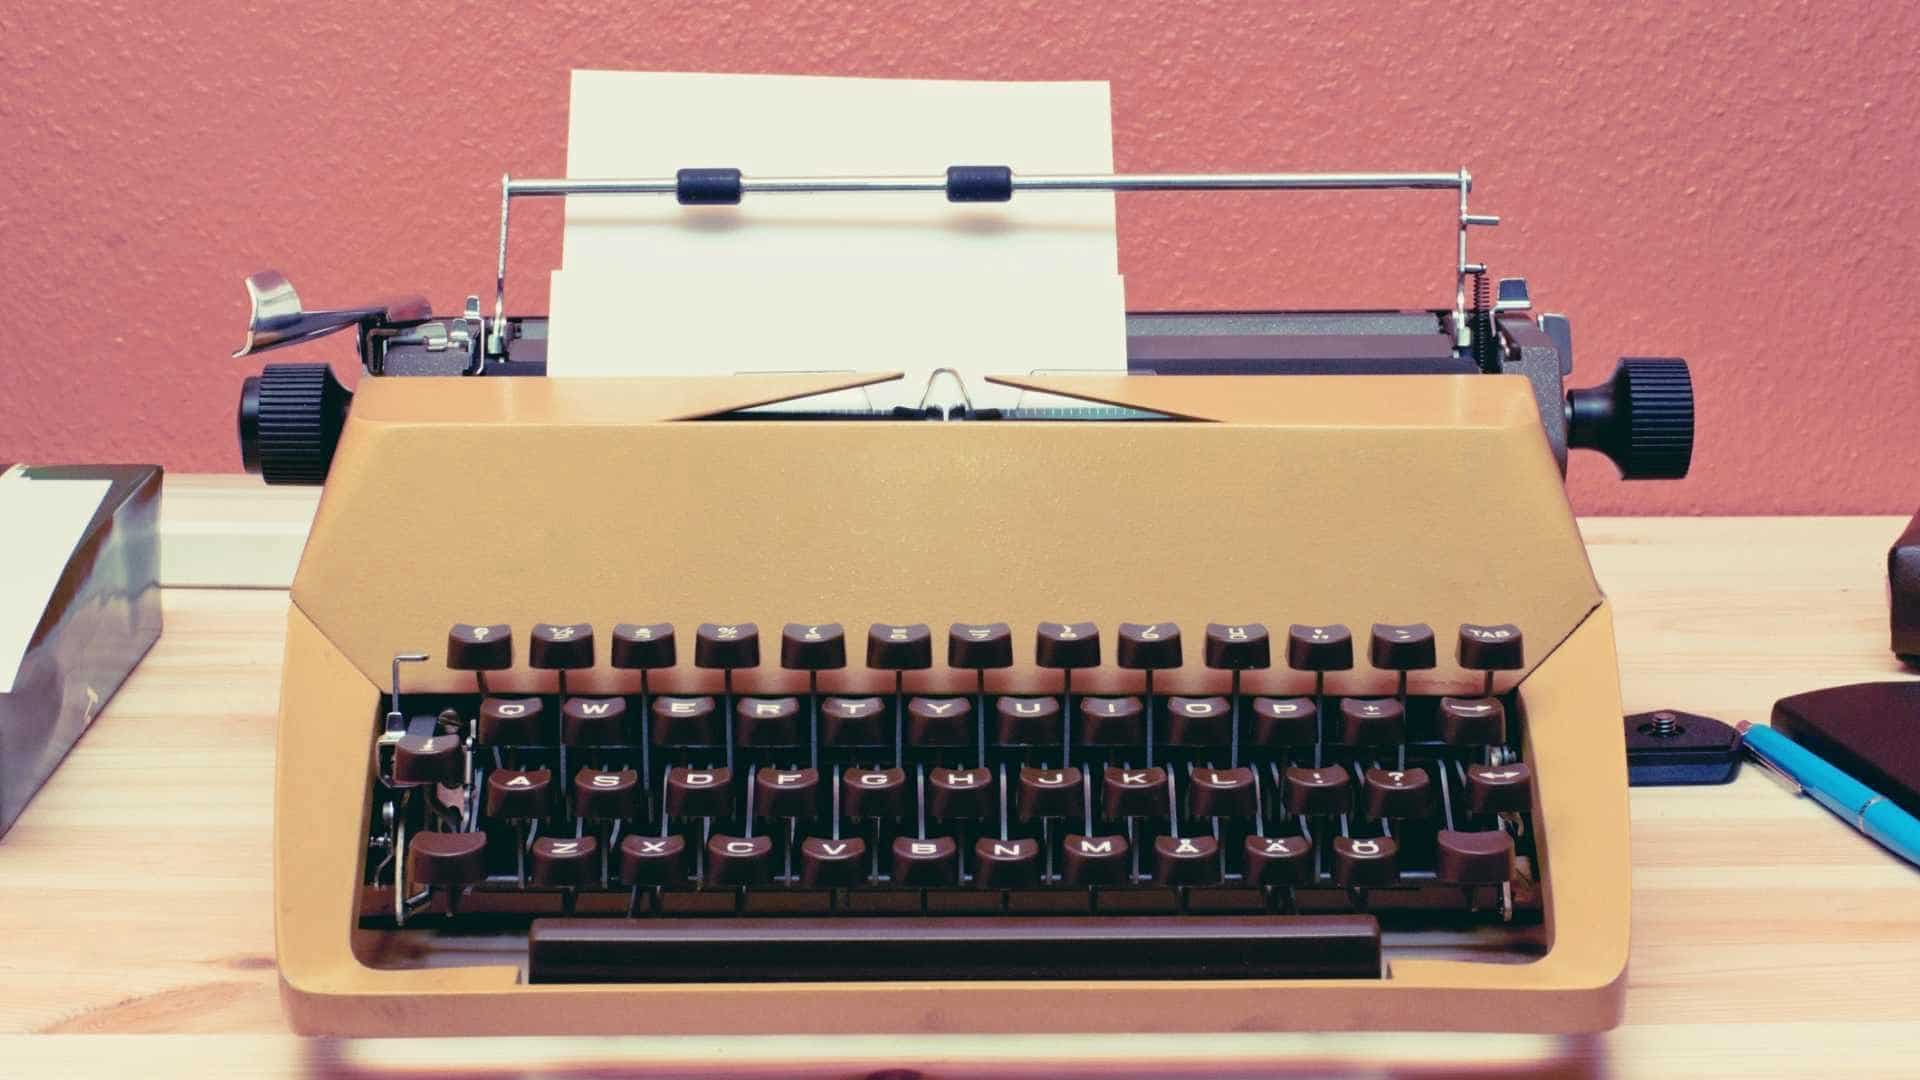 Yellow typewriter with black keys on a wooden desk with a red wall behind it